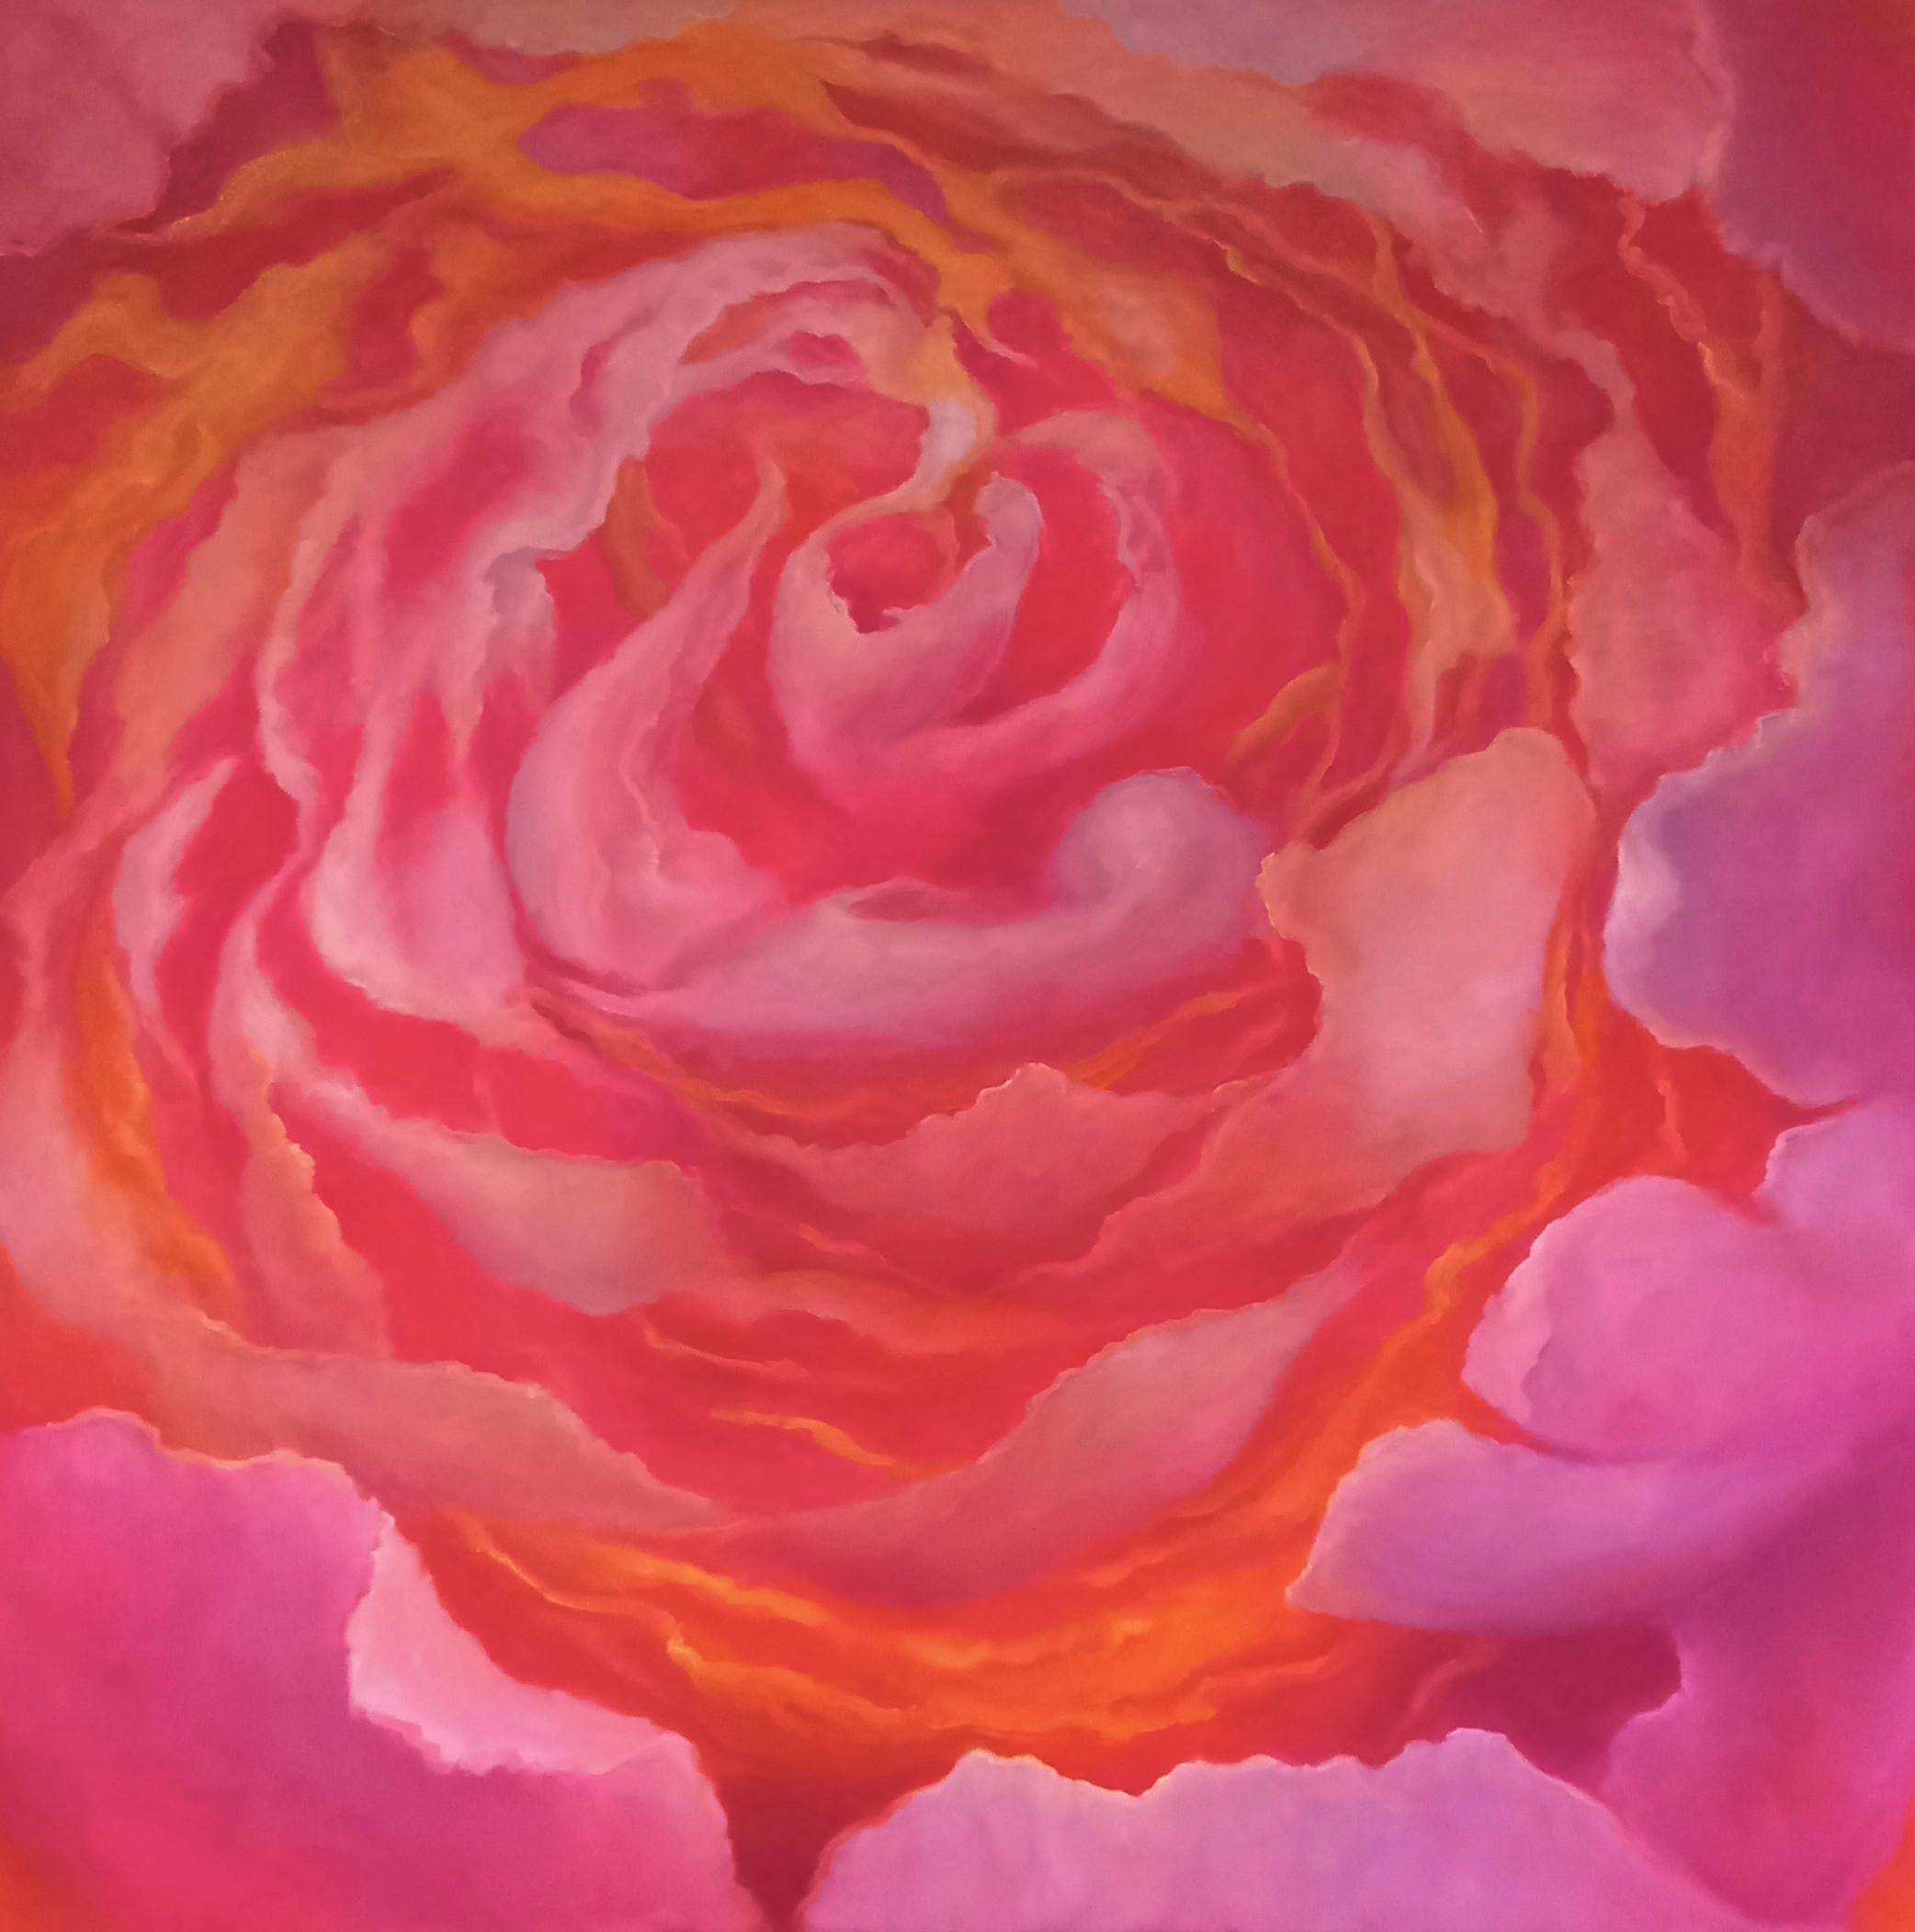 Rose Dorè, Contemporary Original Pink Rose Flower Painting
39" x 39" x 1.5" (HxWxD) Oil on Canvas, Unframed
Hand-signed by the artist.

A large-format square painting by artist Lee Campbell, this canvas is painted in vibrant shades of hot pink and